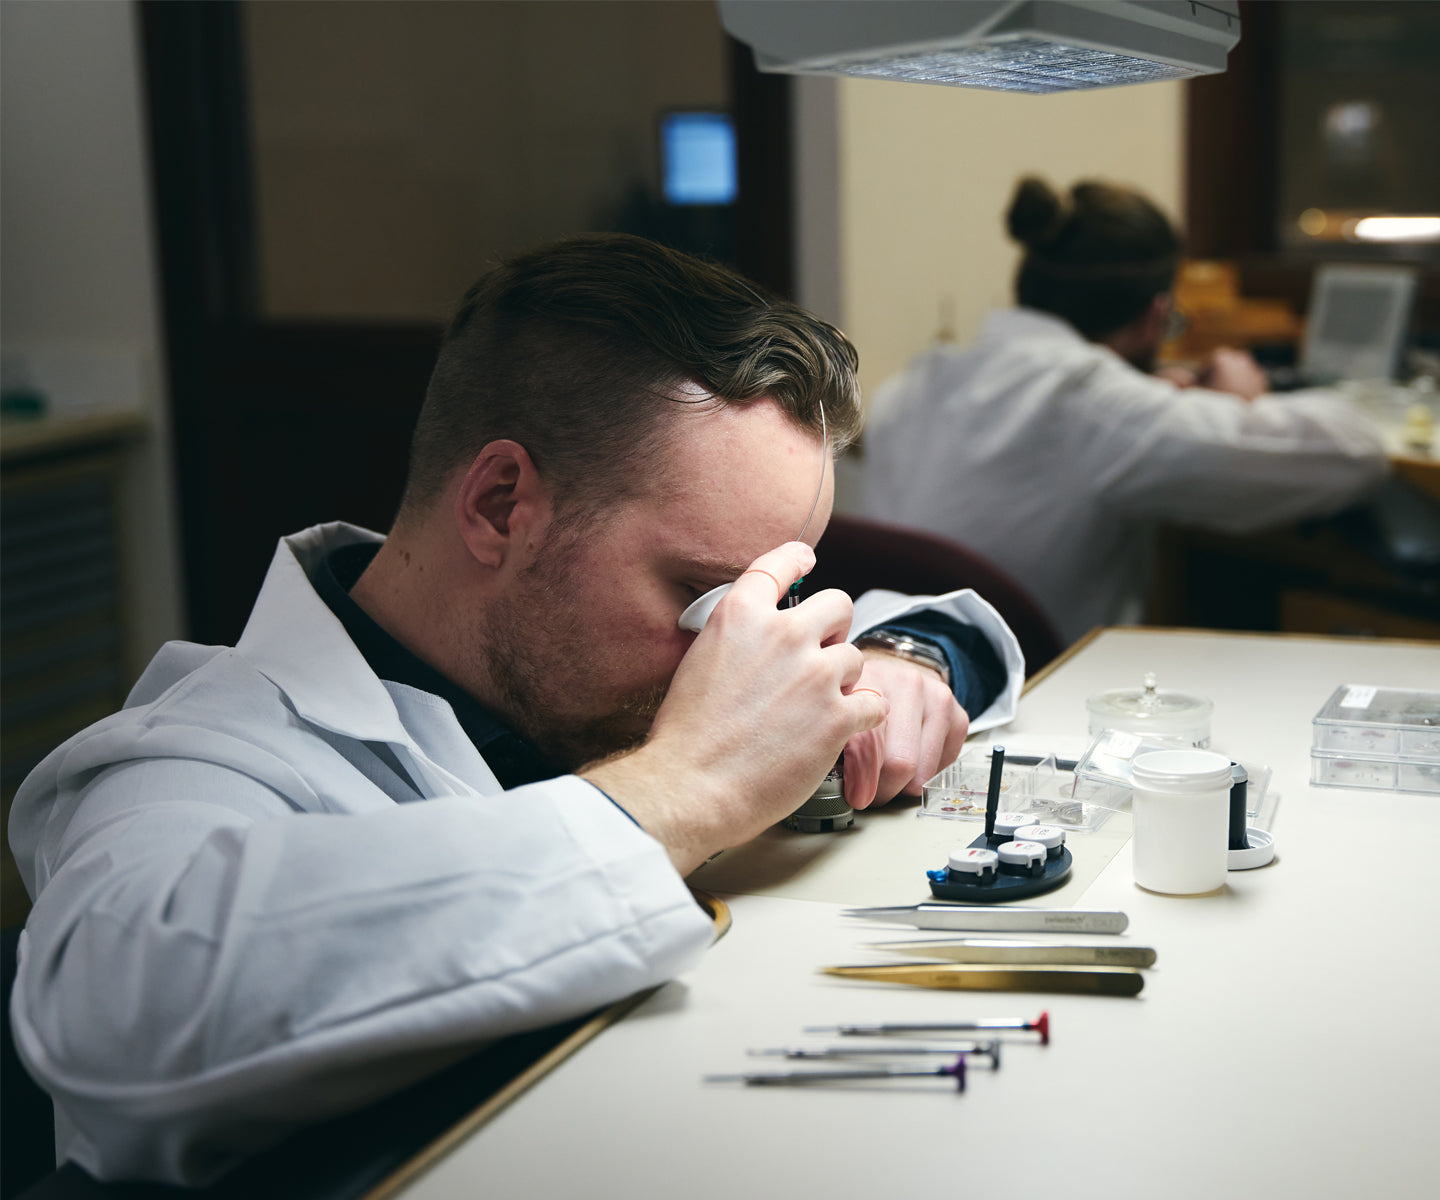 JEWELRY AND WATCH REPAIR – Long's Jewelers